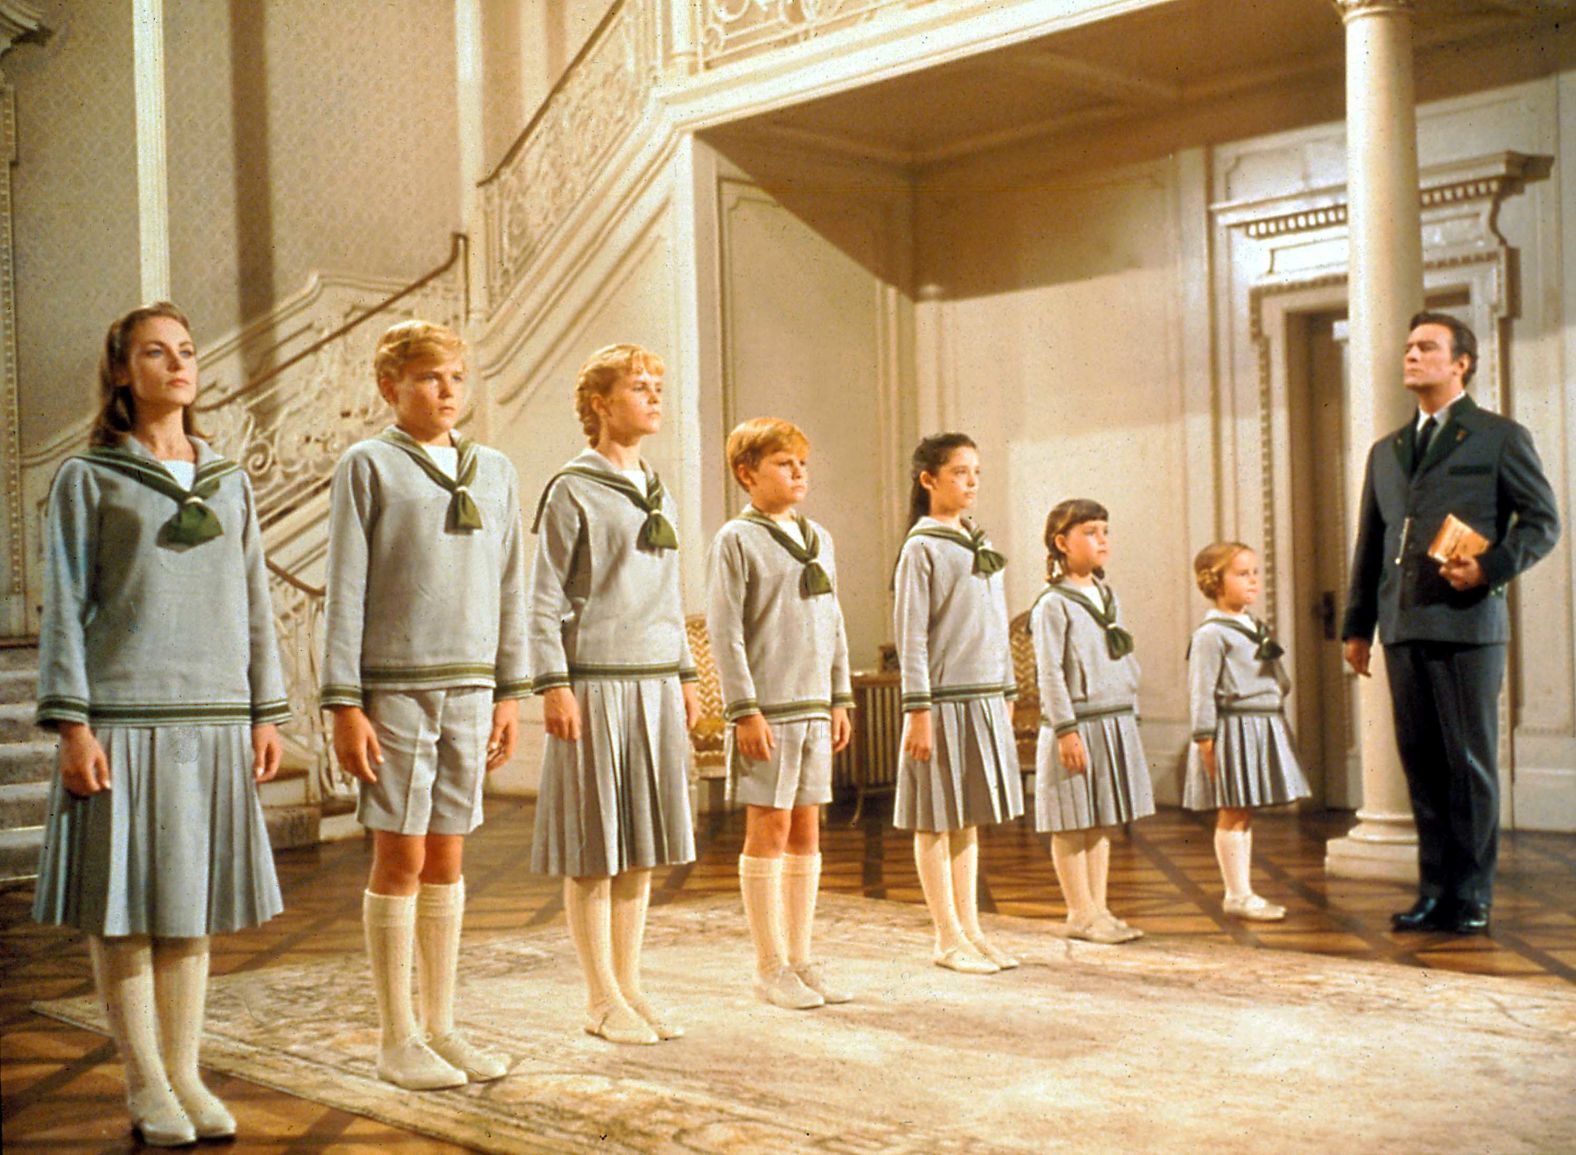 One of Plummer's most beloved roles was as Captain Von Trapp in the 1965 musical "The Sound of Music."